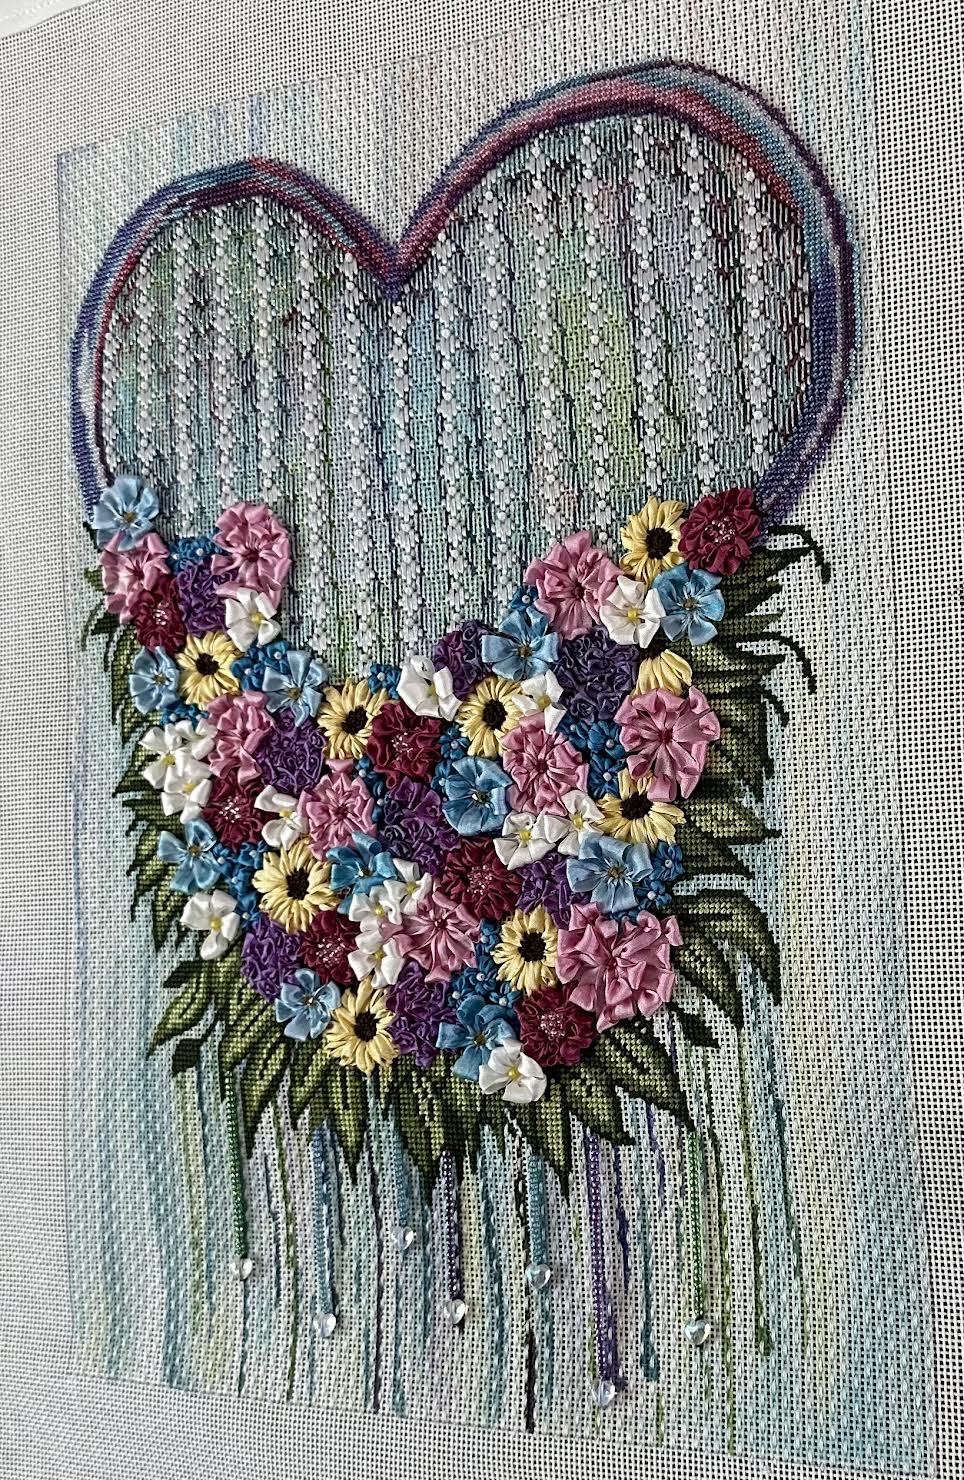 Sew Much Fun Hearts and Roses